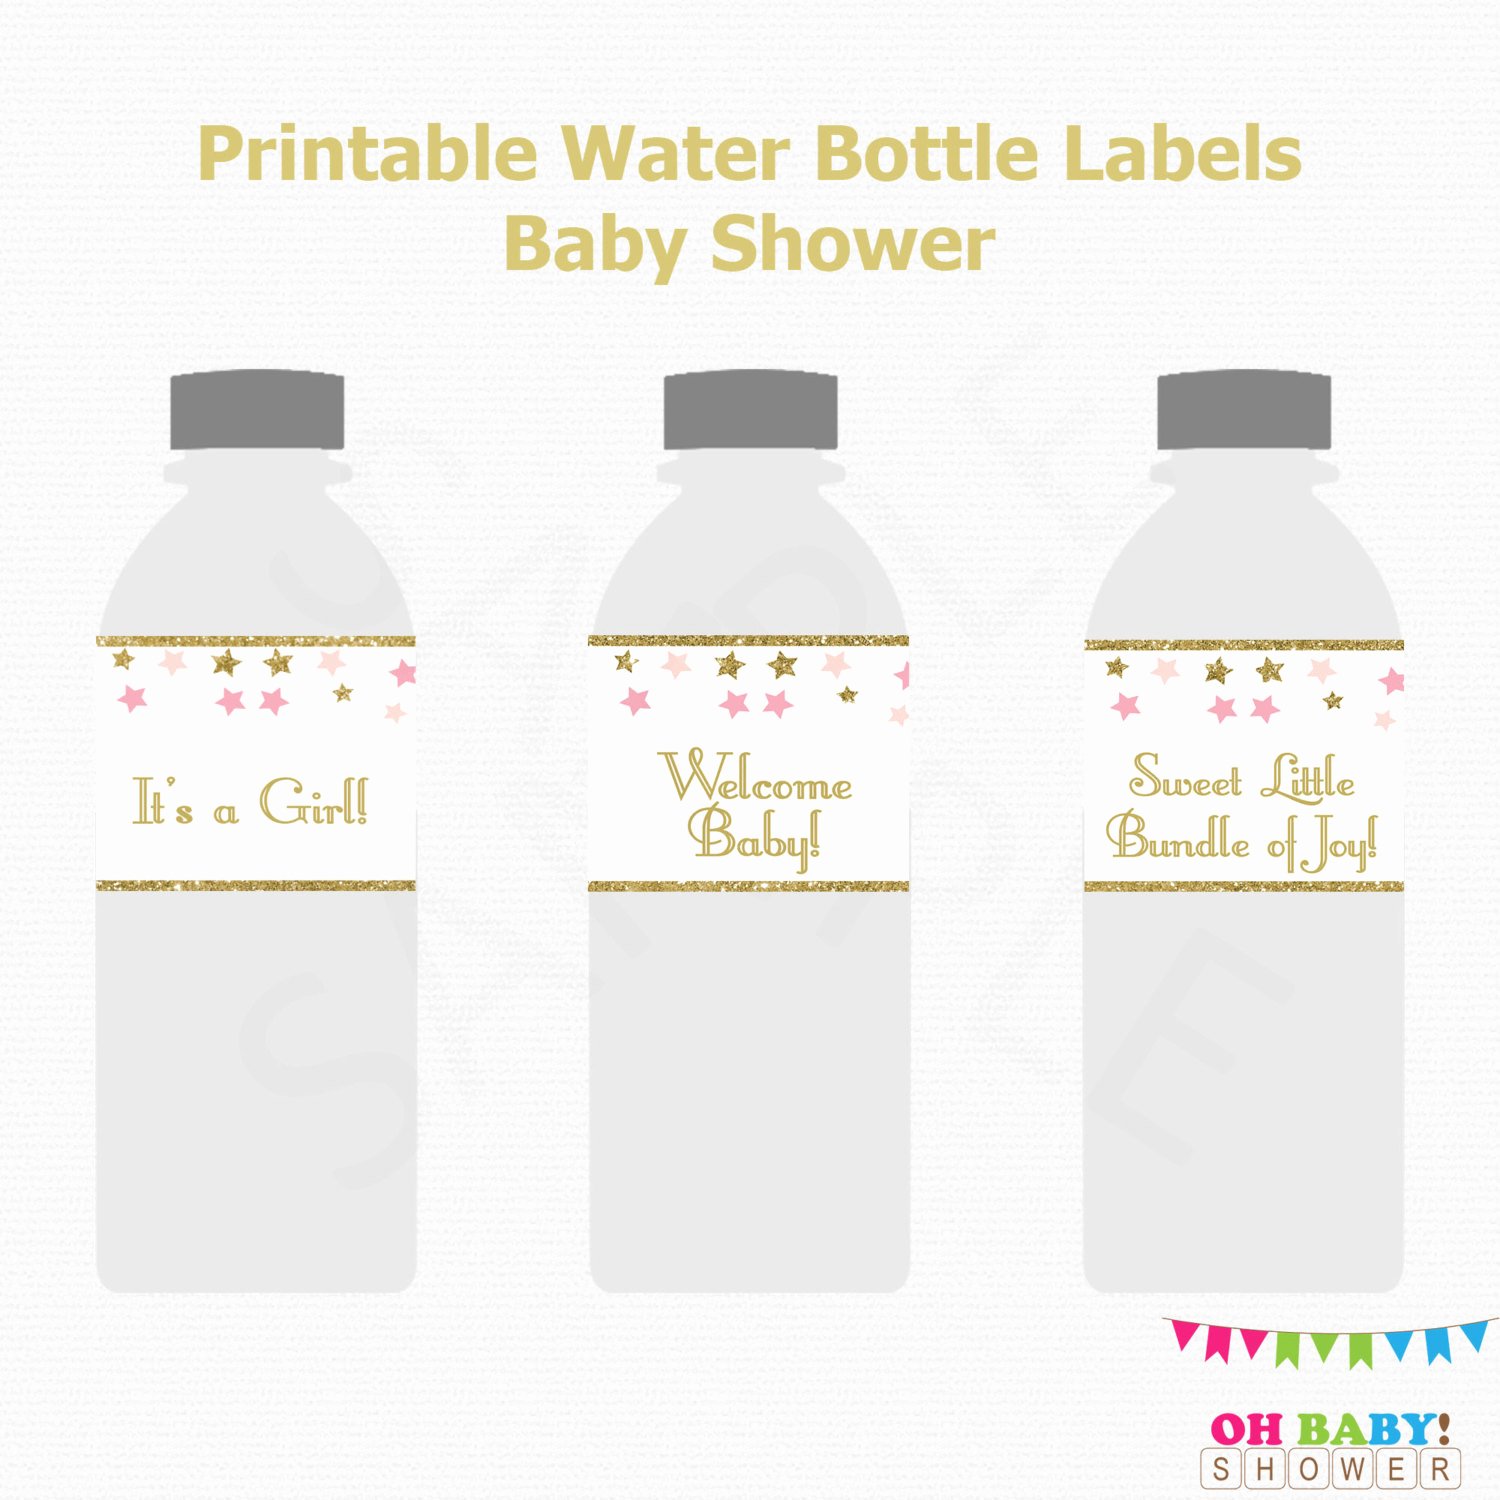 Free Printable Water Bottle Labels for Baby Shower New Printable Water Bottle Labels Baby Shower Twinkle Twinkle